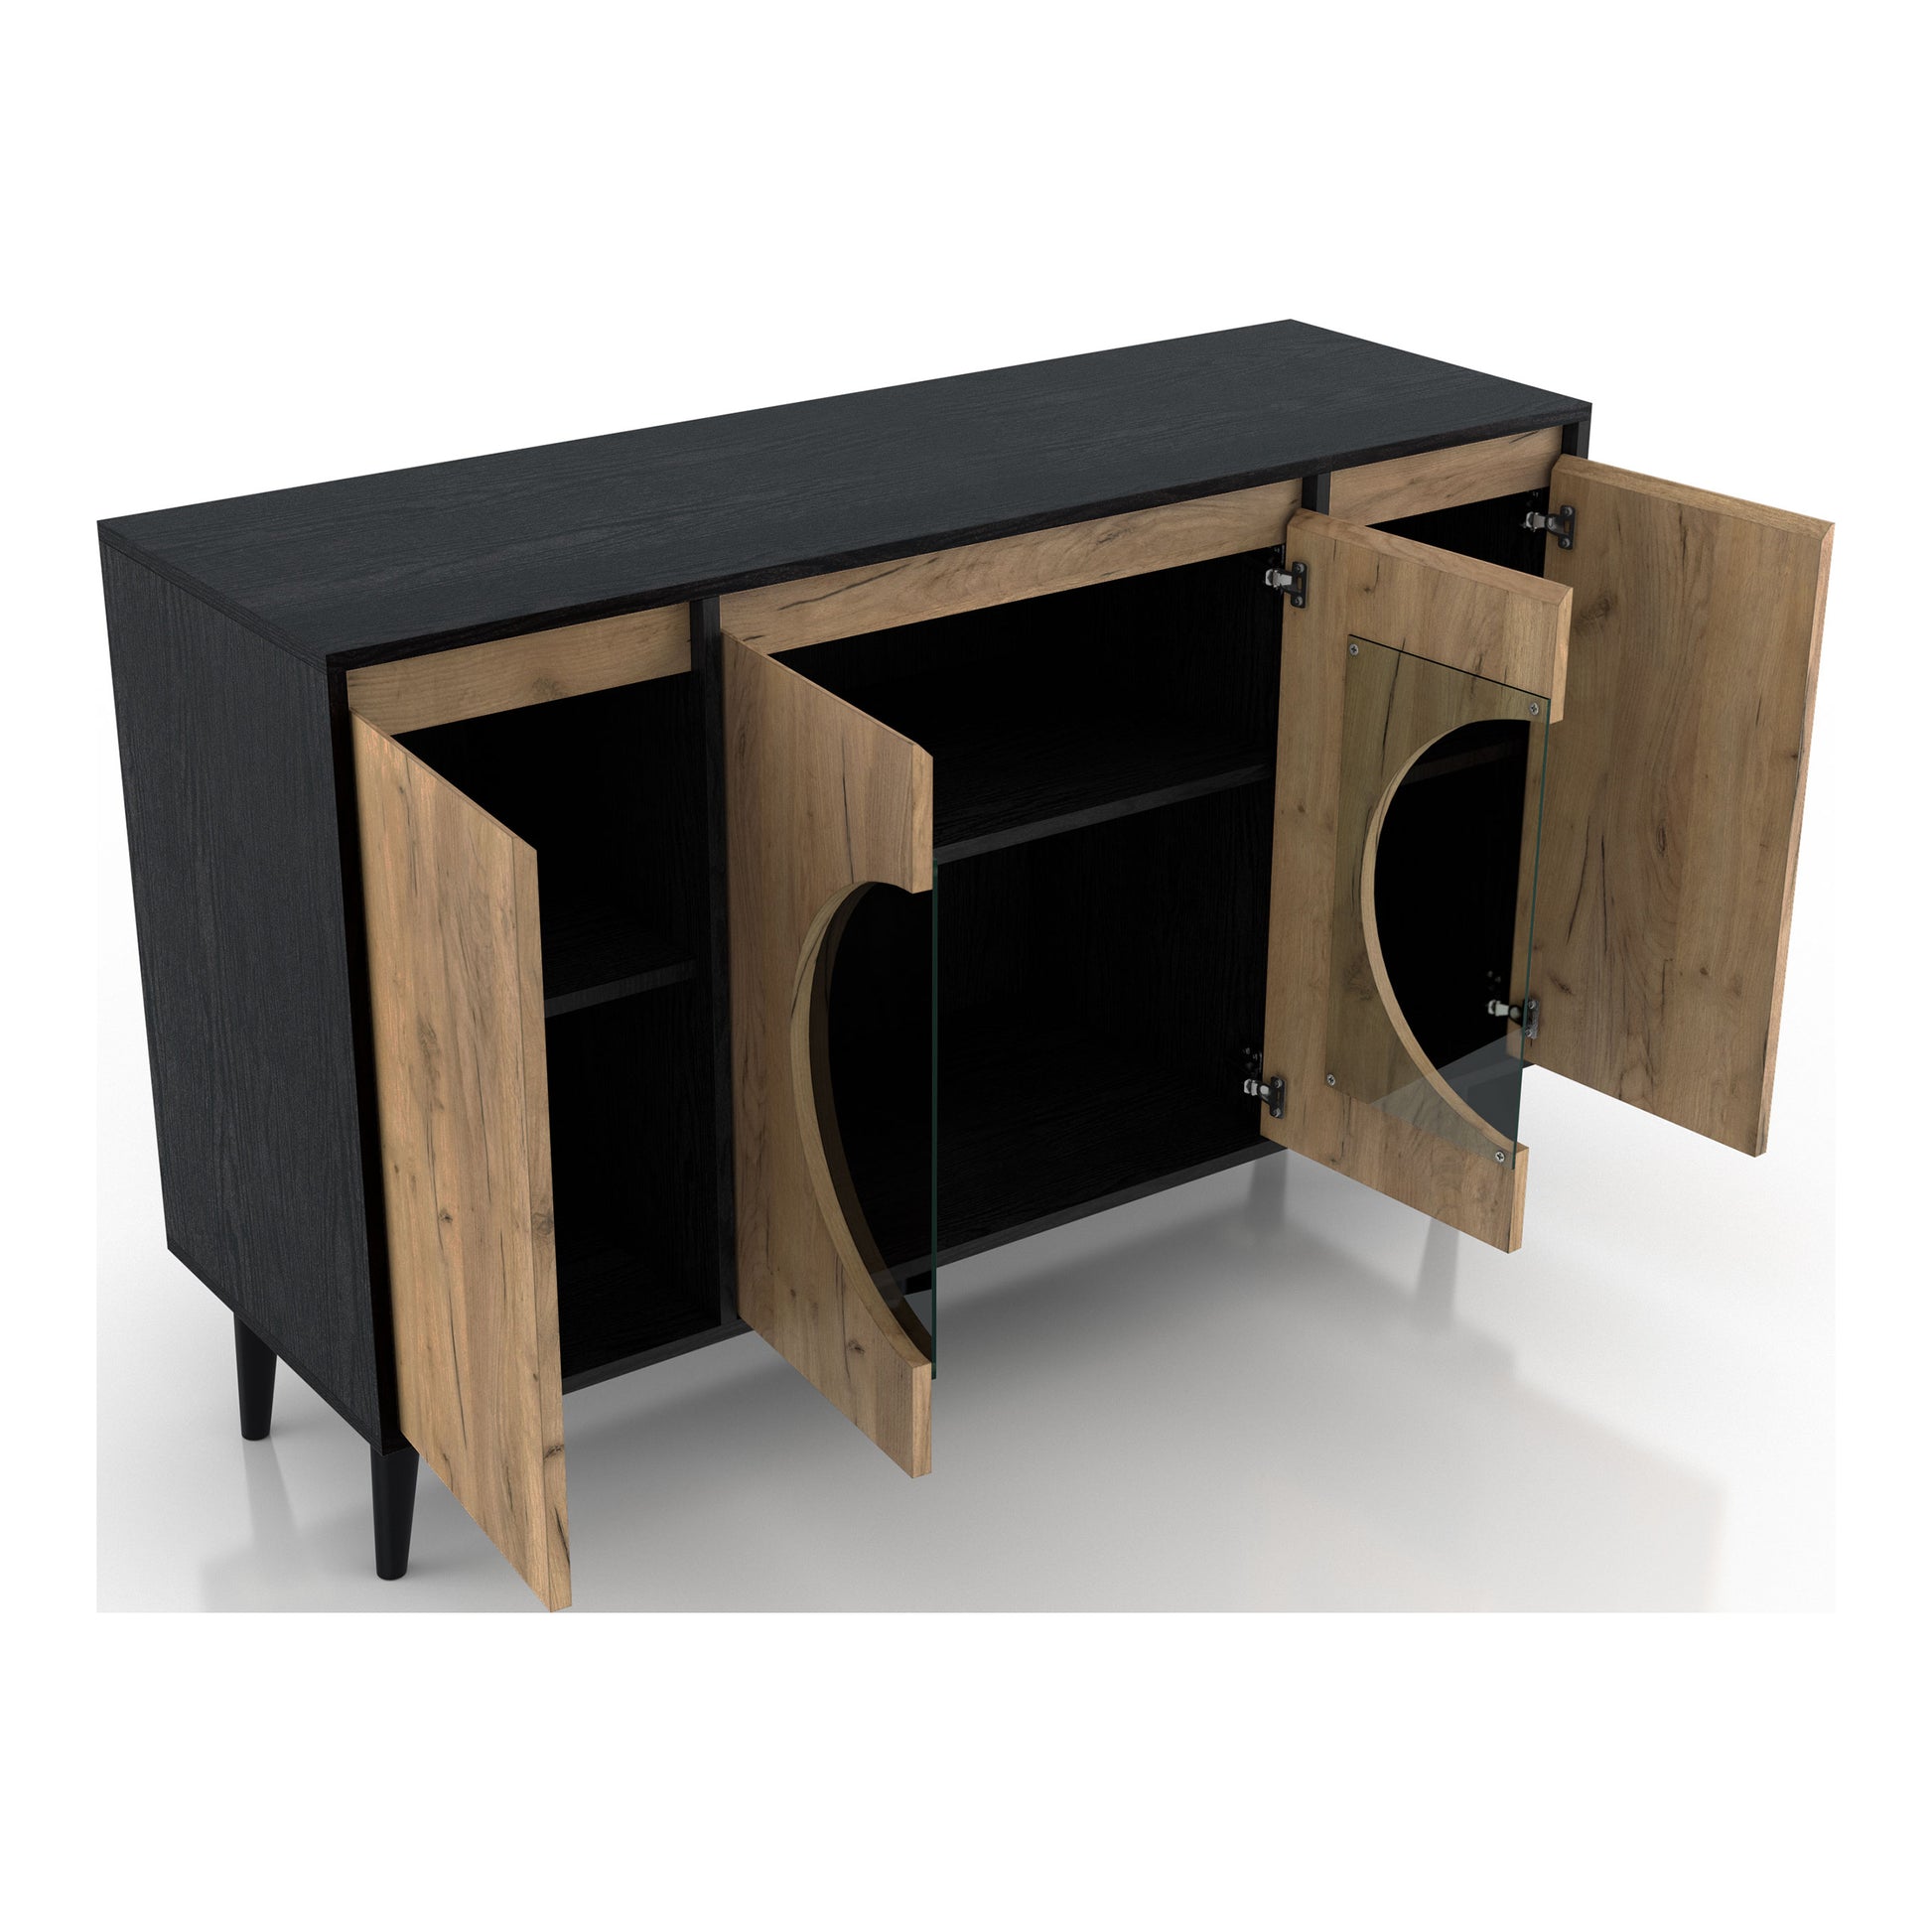 Right angled modern light oak and black six-shelf buffet with four doors open on a white background